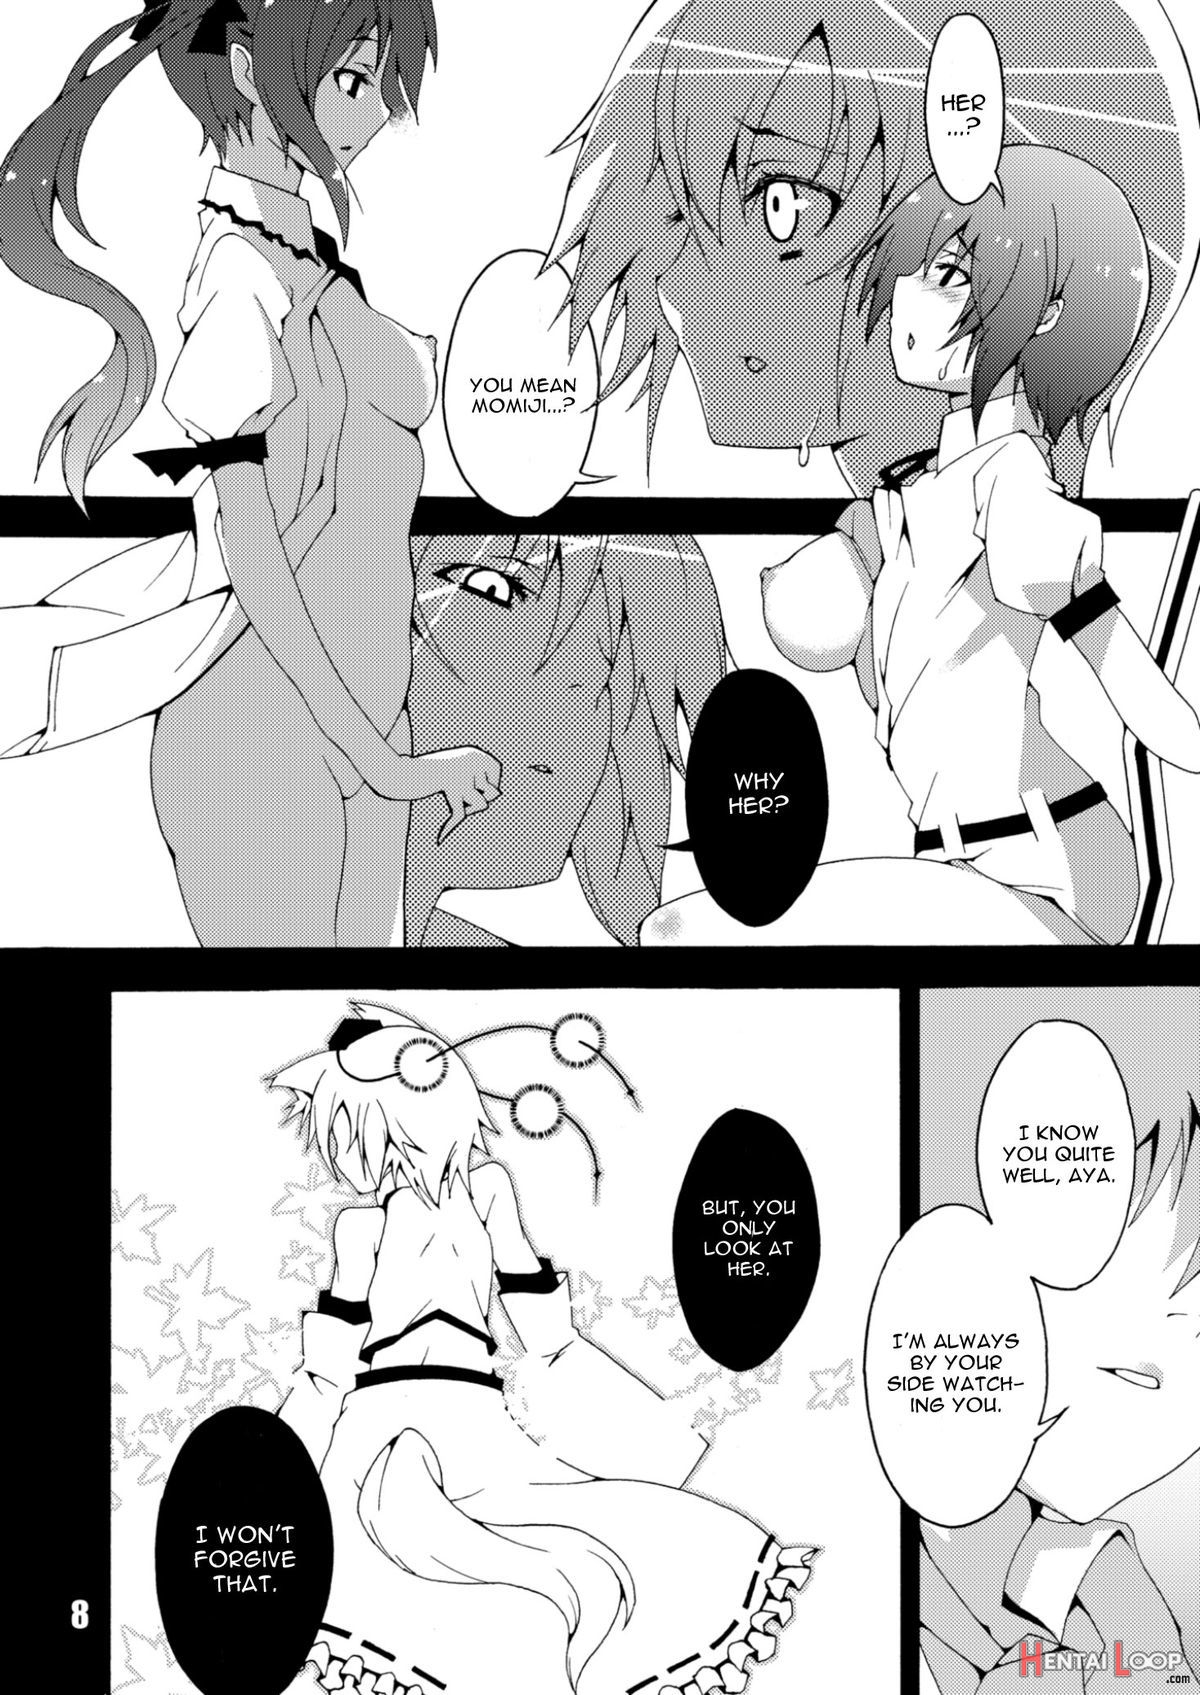 Kanojo No Ryuugi There Is No Such Thing As Light. page 8